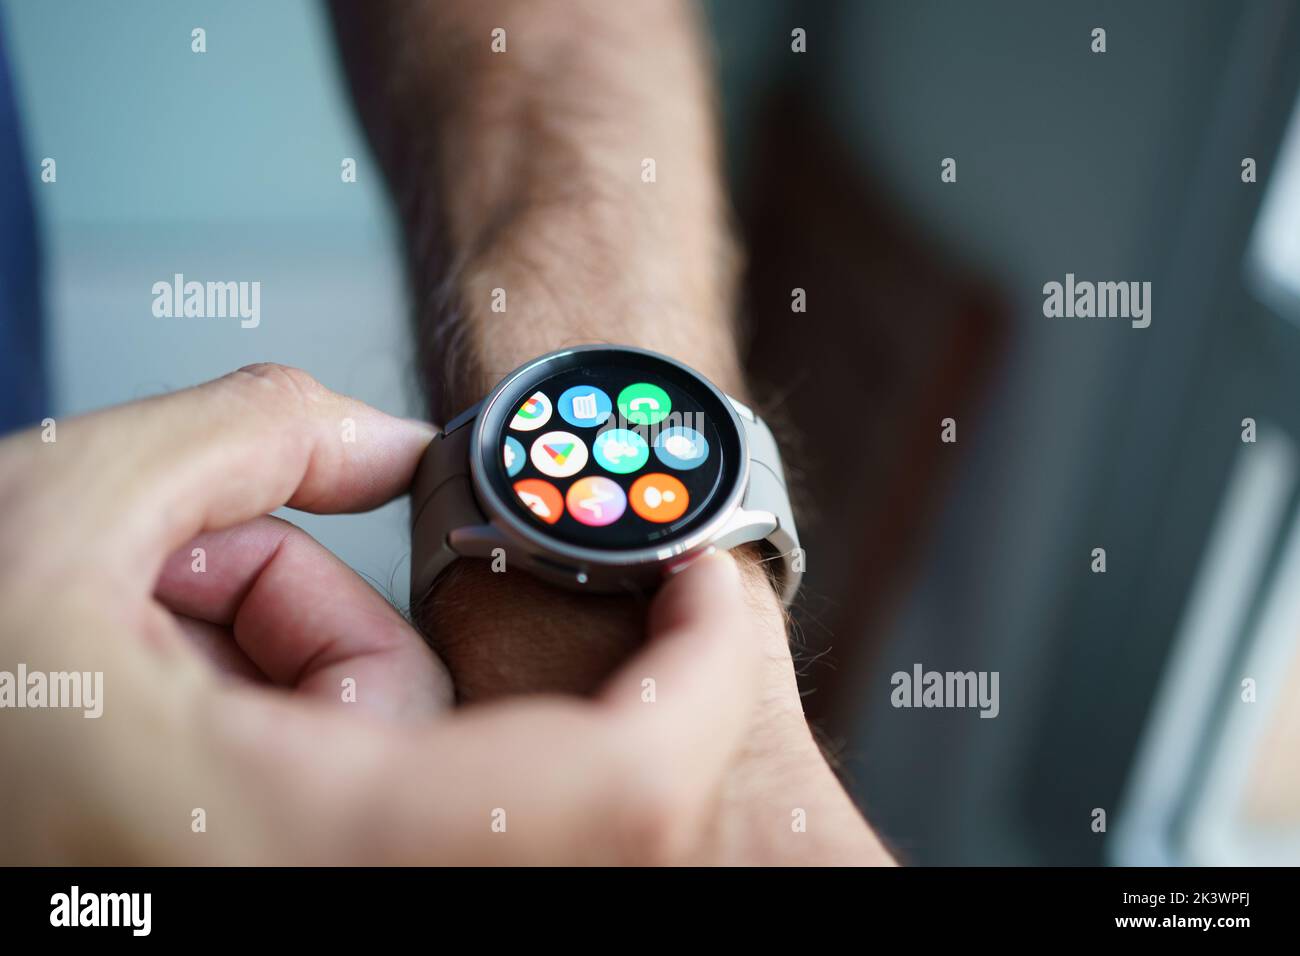 Granada, Andalusia, Spain - September 28, 2022: Man using the app screen of the new Samsung Watch 5 Pro. Stock Photo